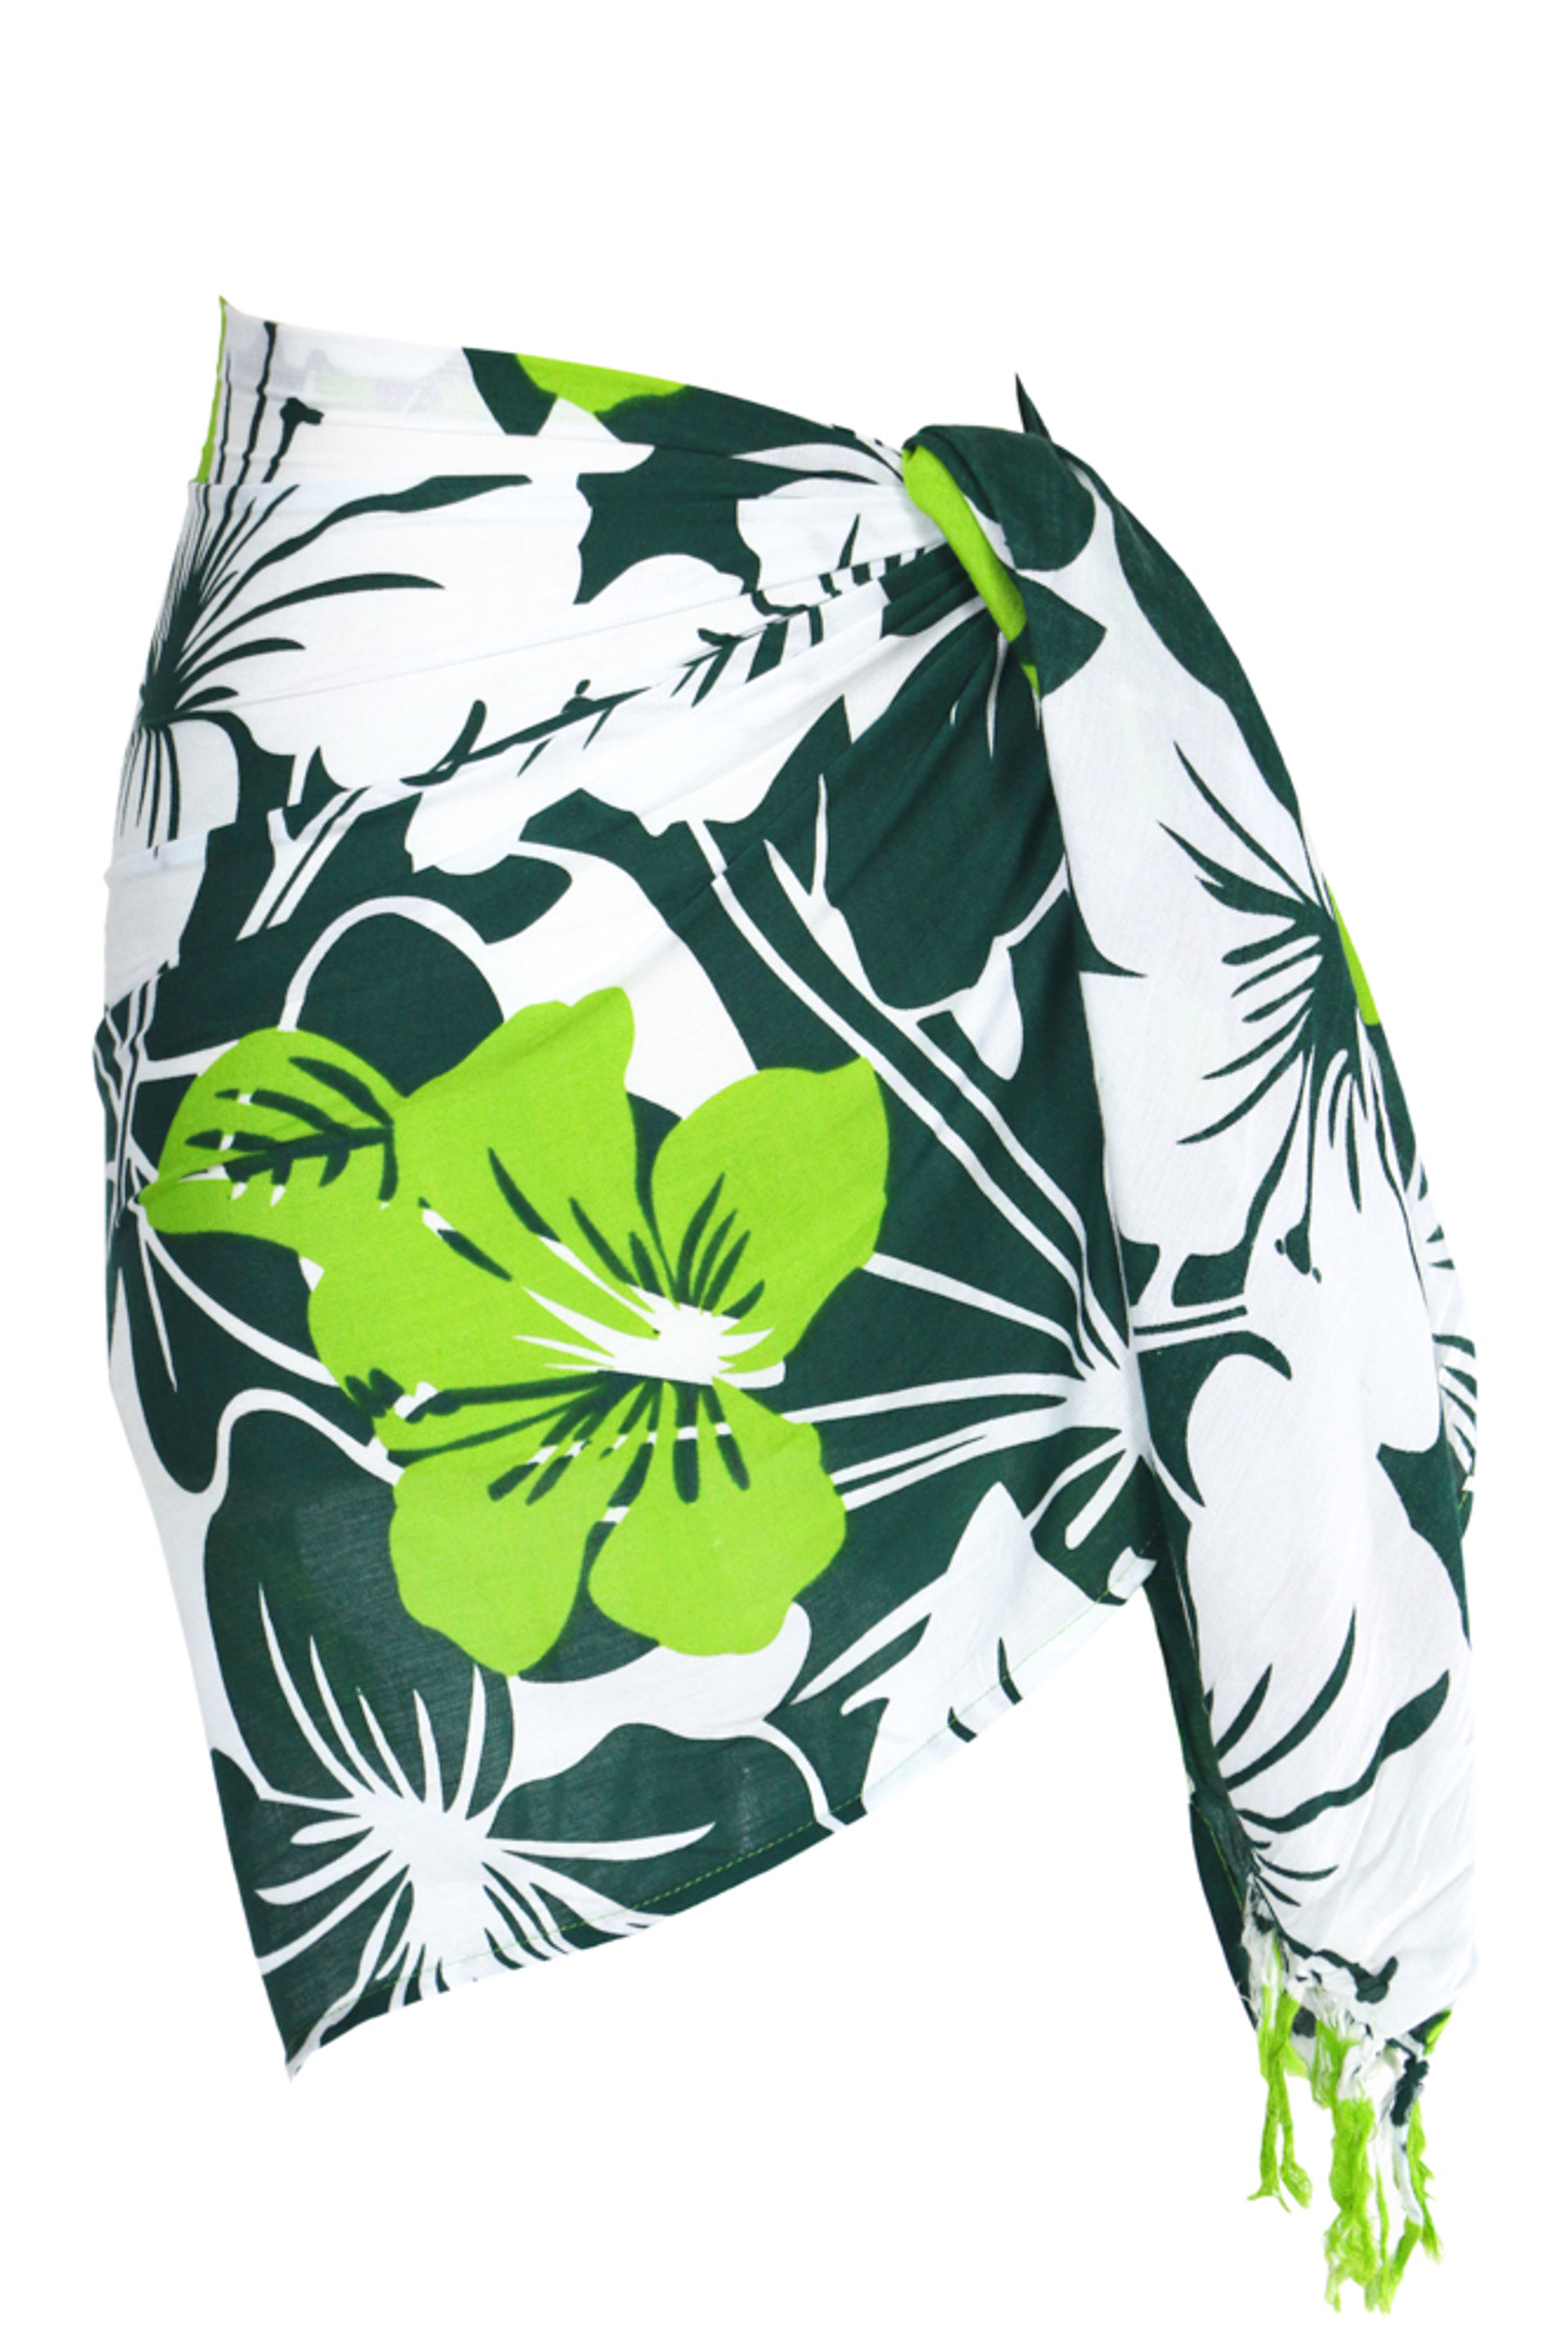 Floral Half Sarong Amazonia Jungle Green and White - Final Sale - No ...